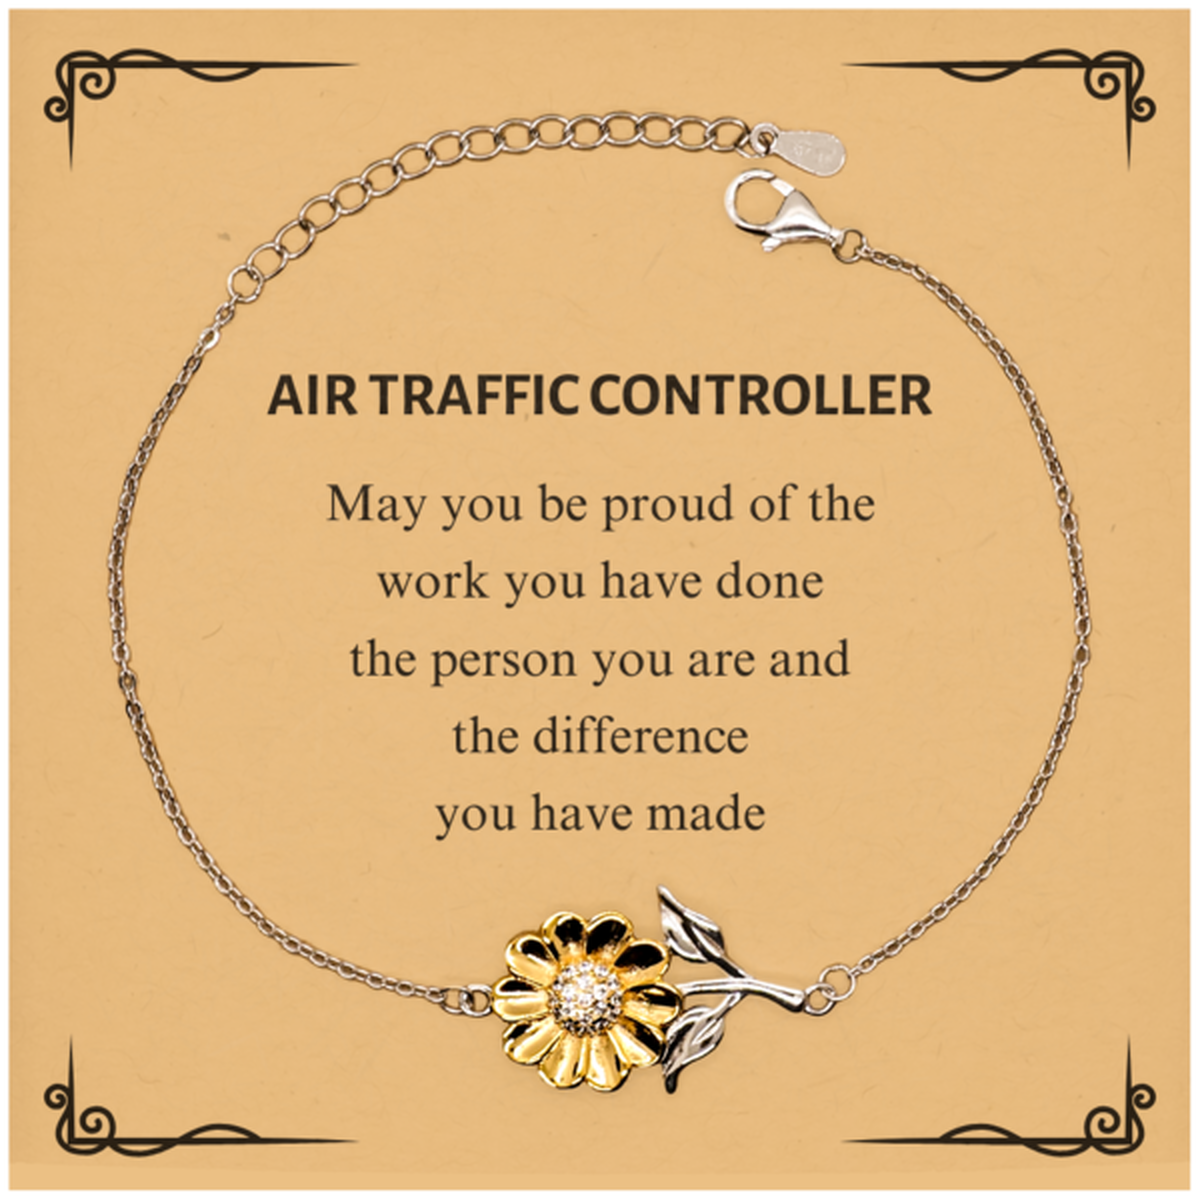 Air Traffic Controller May you be proud of the work you have done, Retirement Air Traffic Controller Sunflower Bracelet for Colleague Appreciation Gifts Amazing for Air Traffic Controller